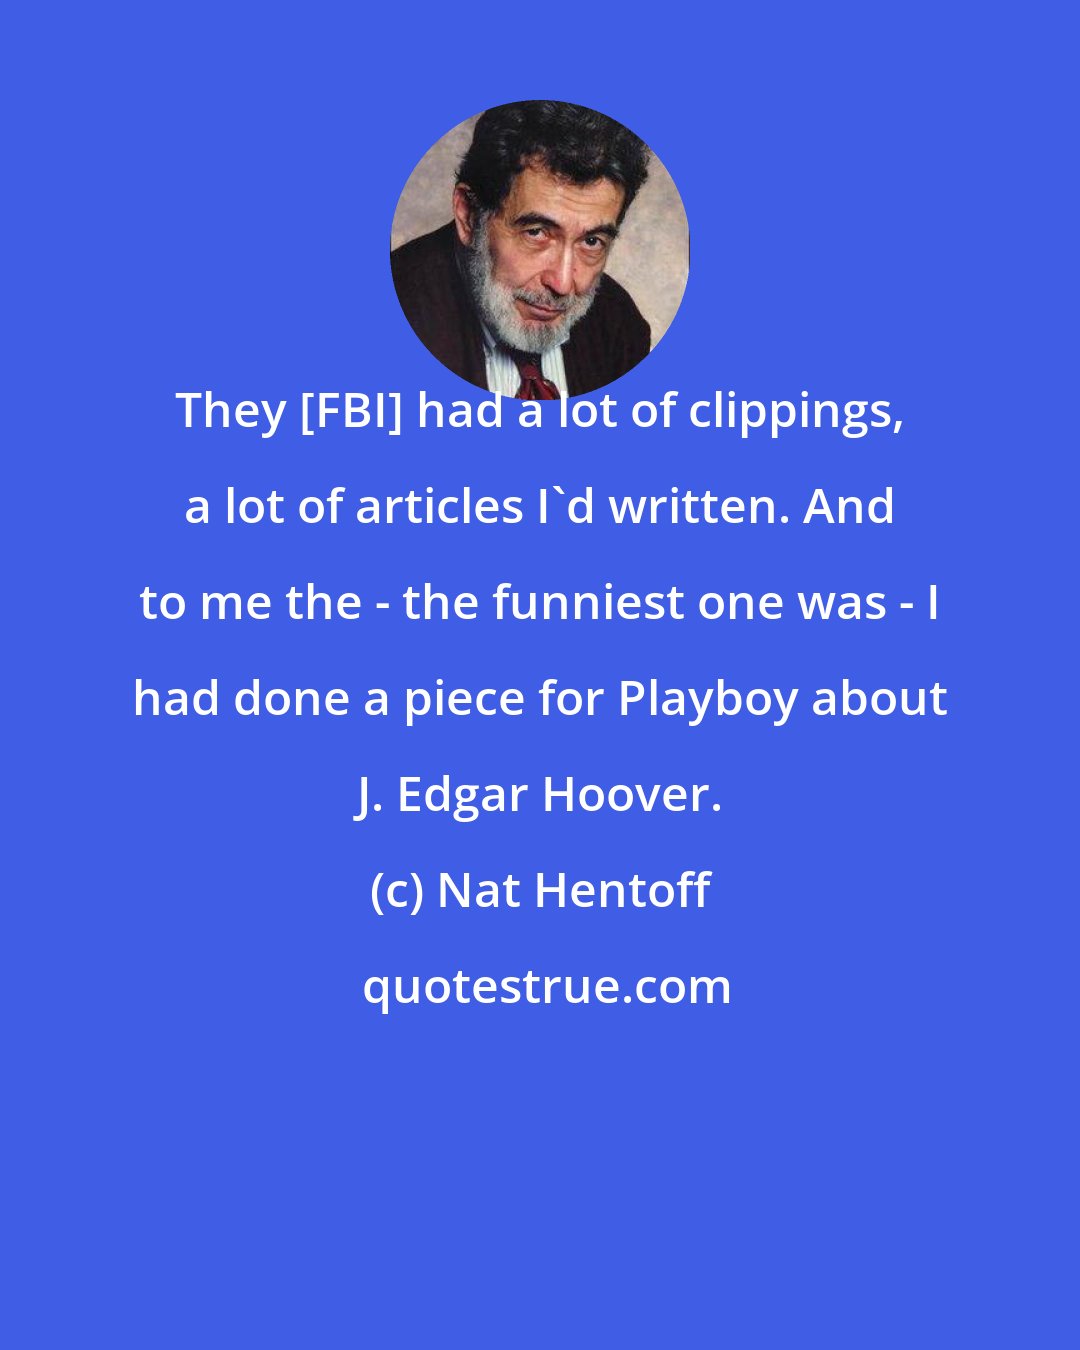 Nat Hentoff: They [FBI] had a lot of clippings, a lot of articles I'd written. And to me the - the funniest one was - I had done a piece for Playboy about J. Edgar Hoover.